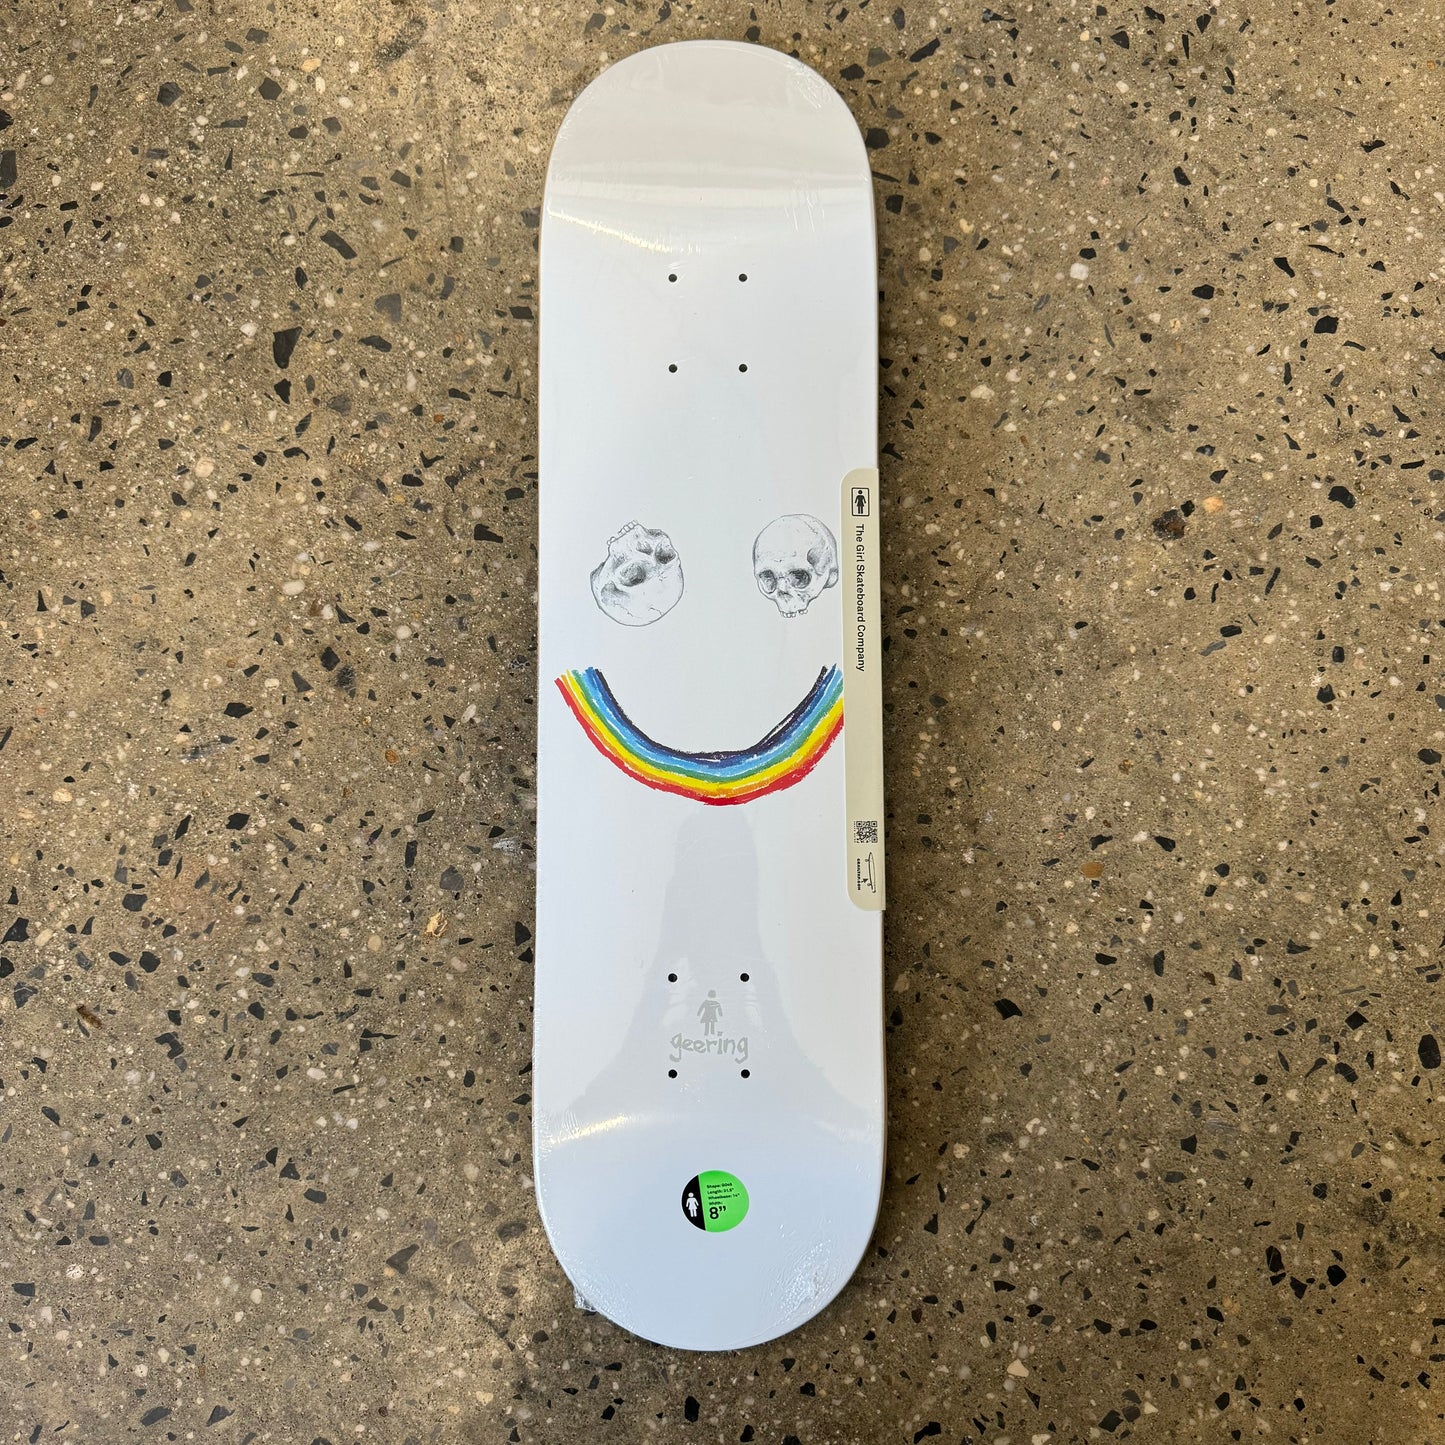 two skull heads and rainbow on white skate deck